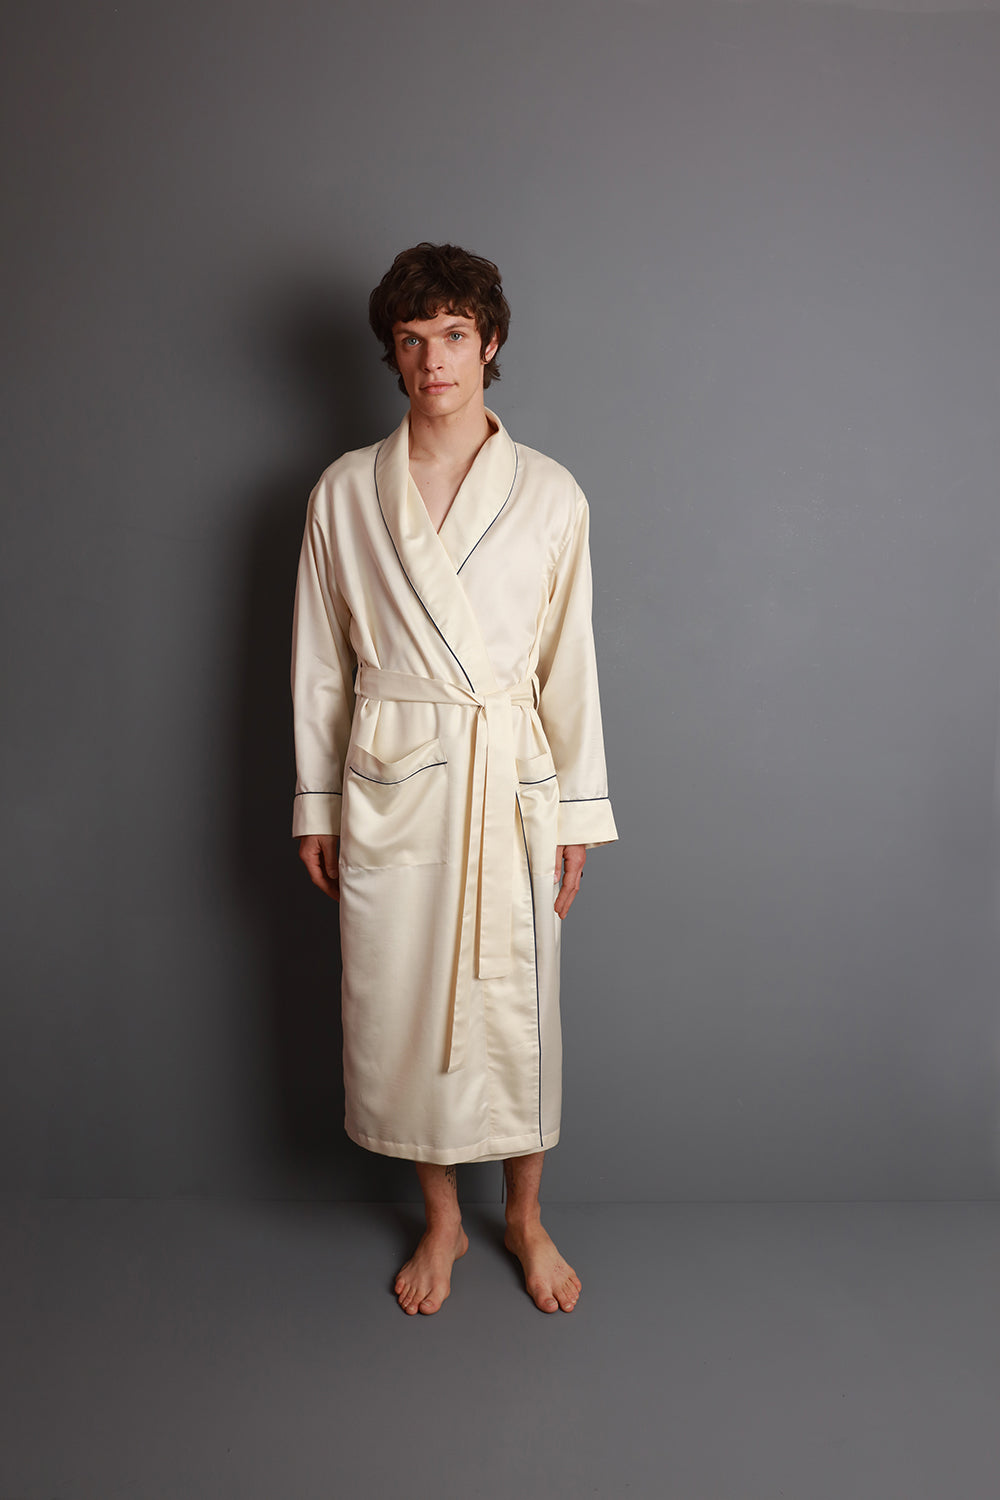 Men's Mulberry Silk Robe - Natural Ivory with Navy Piping